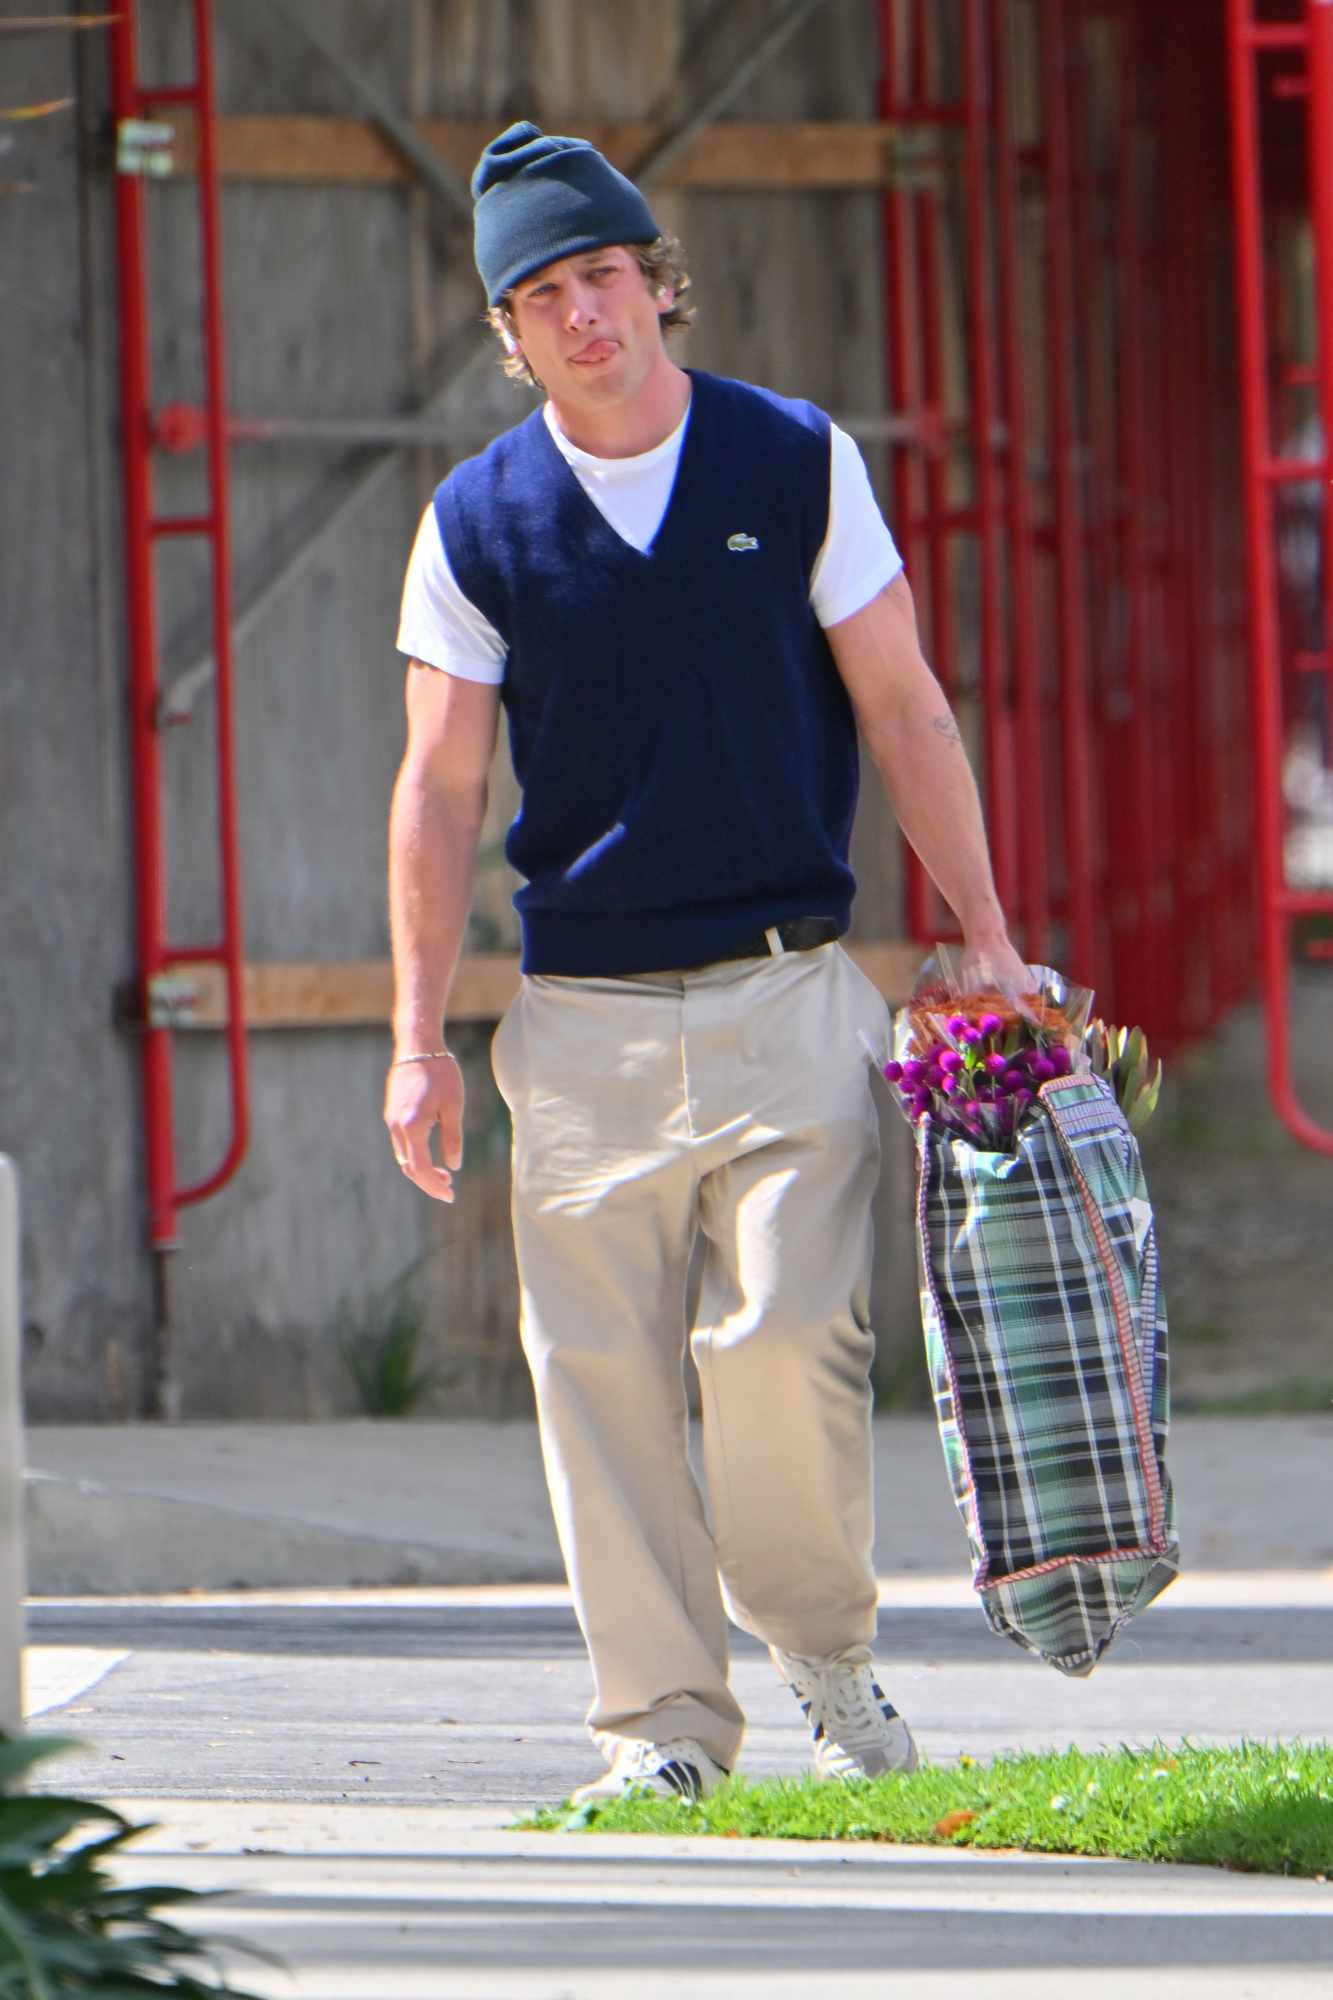 Jeremy Allen White at the farmer's market carrying a tote bag full of flowers